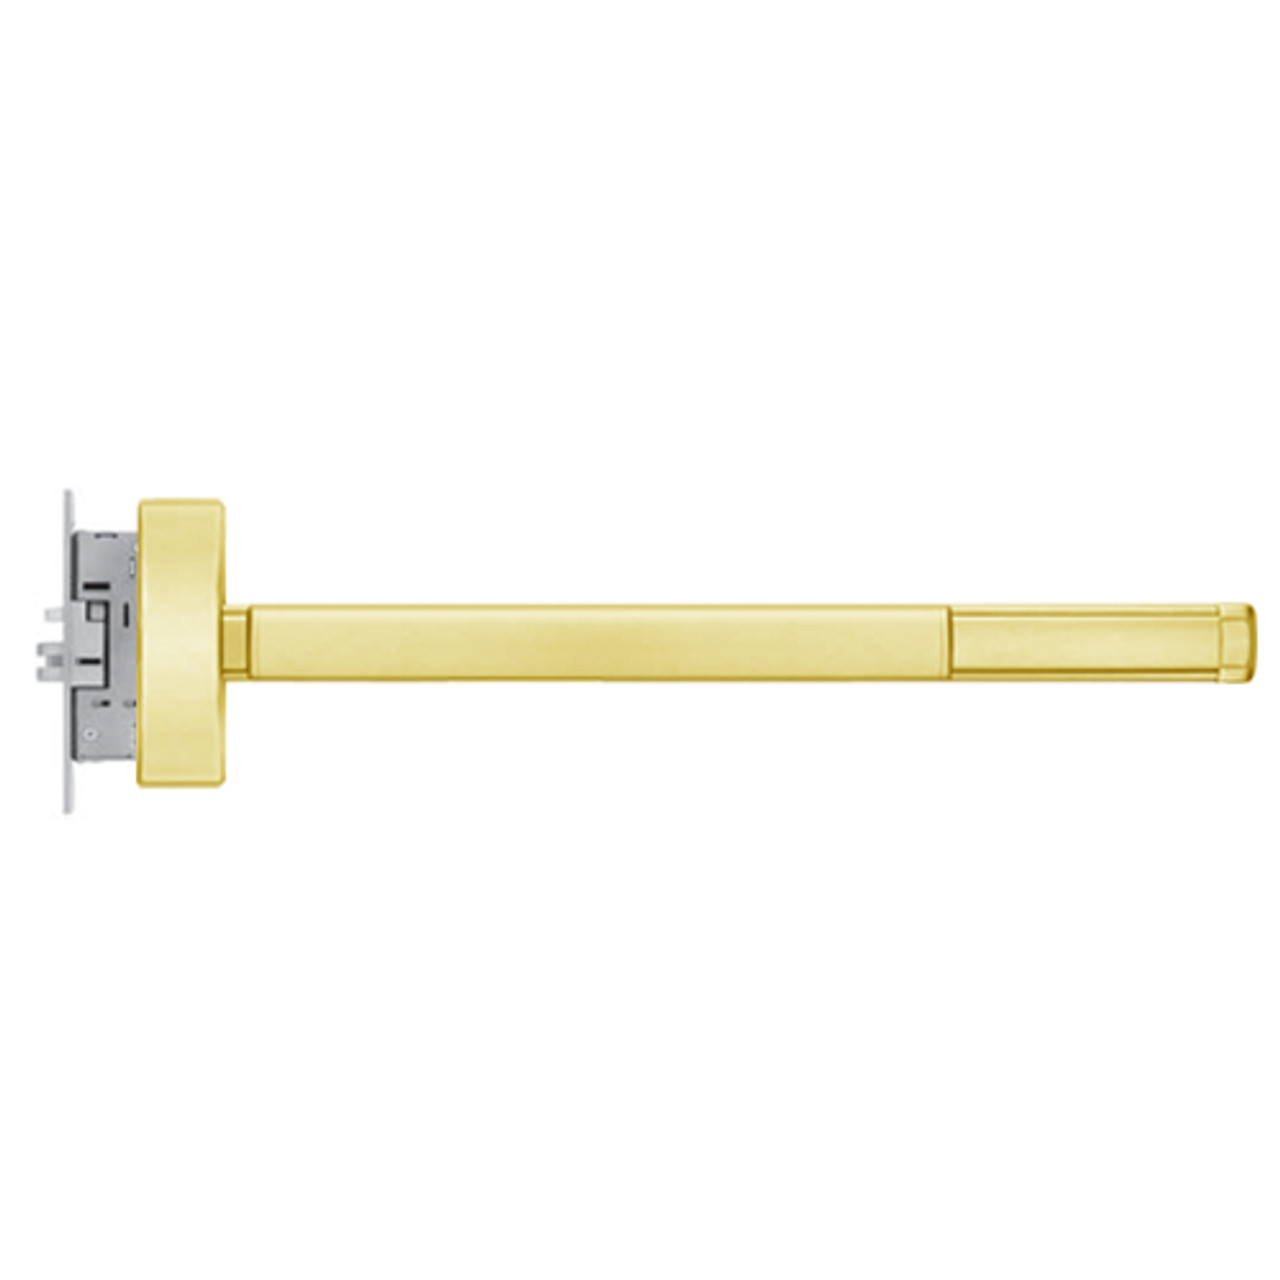 ELR2305-LHR-605-36 PHI 2300 Series Apex Mortise Exit Device with Electric Latch Retraction Prepped for Key Controls Thumb Piece in Bright Brass Finish